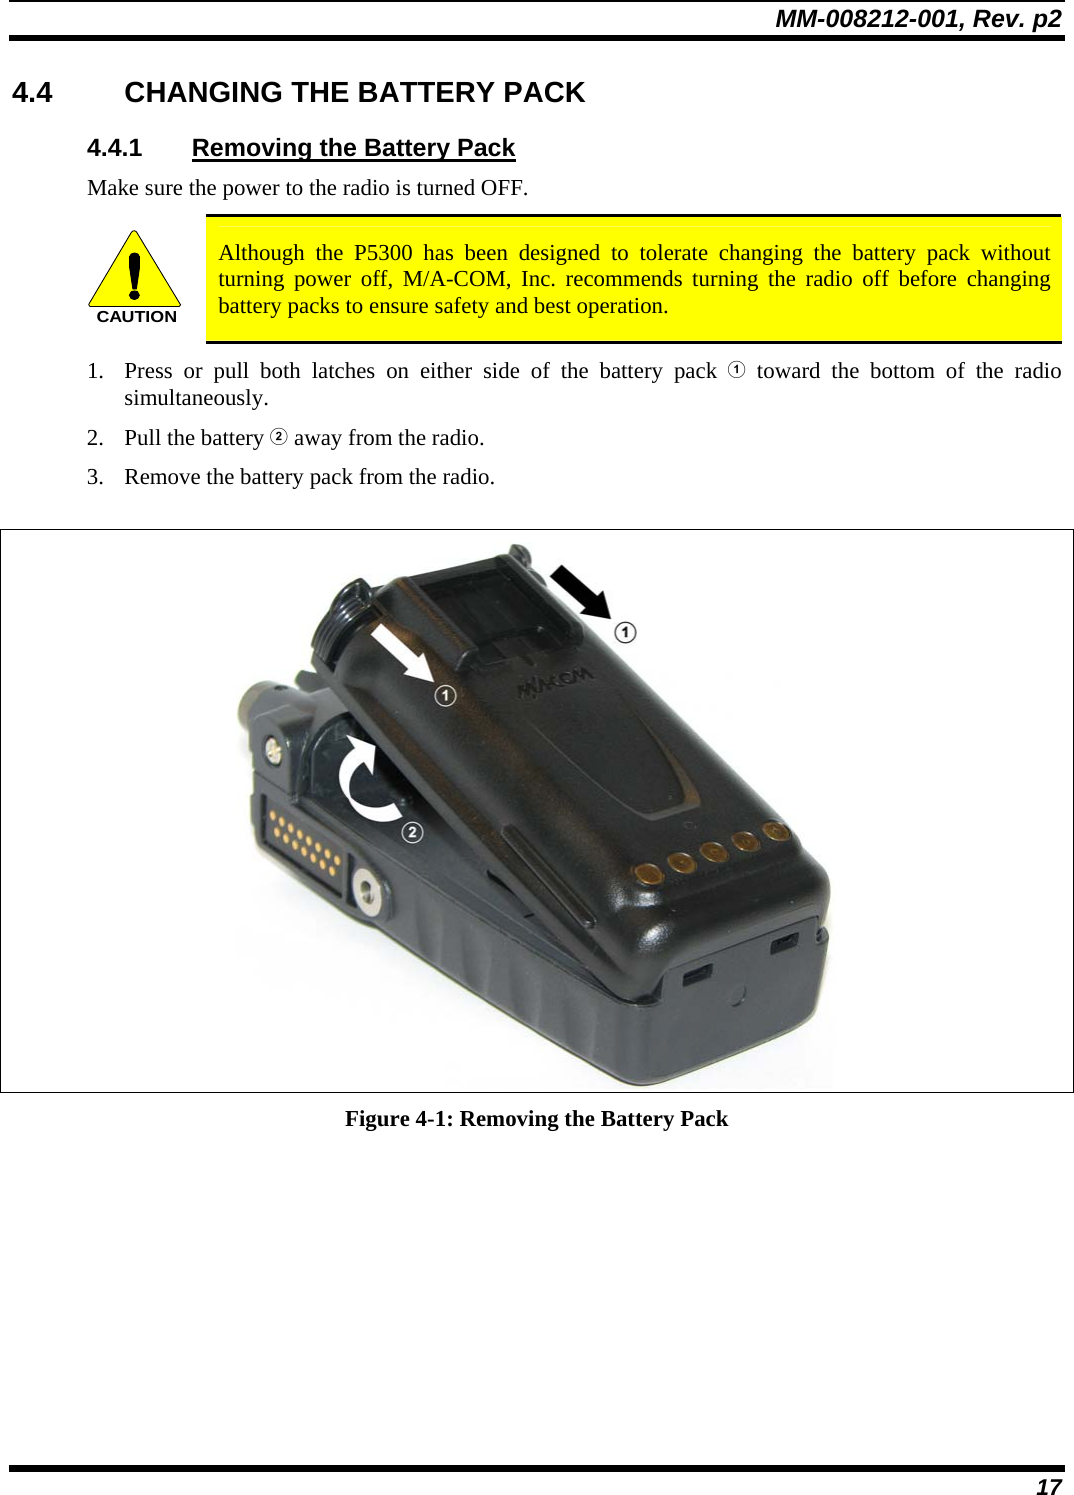 MM-008212-001, Rev. p2 17 4.4  CHANGING THE BATTERY PACK 4.4.1  Removing the Battery Pack Make sure the power to the radio is turned OFF. CAUTION Although the P5300 has been designed to tolerate changing the battery pack without turning power off, M/A-COM, Inc. recommends turning the radio off before changing battery packs to ensure safety and best operation. 1. Press or pull both latches on either side of the battery pack  toward the bottom of the radio simultaneously.  2. Pull the battery  away from the radio. 3. Remove the battery pack from the radio.   Figure 4-1: Removing the Battery Pack 